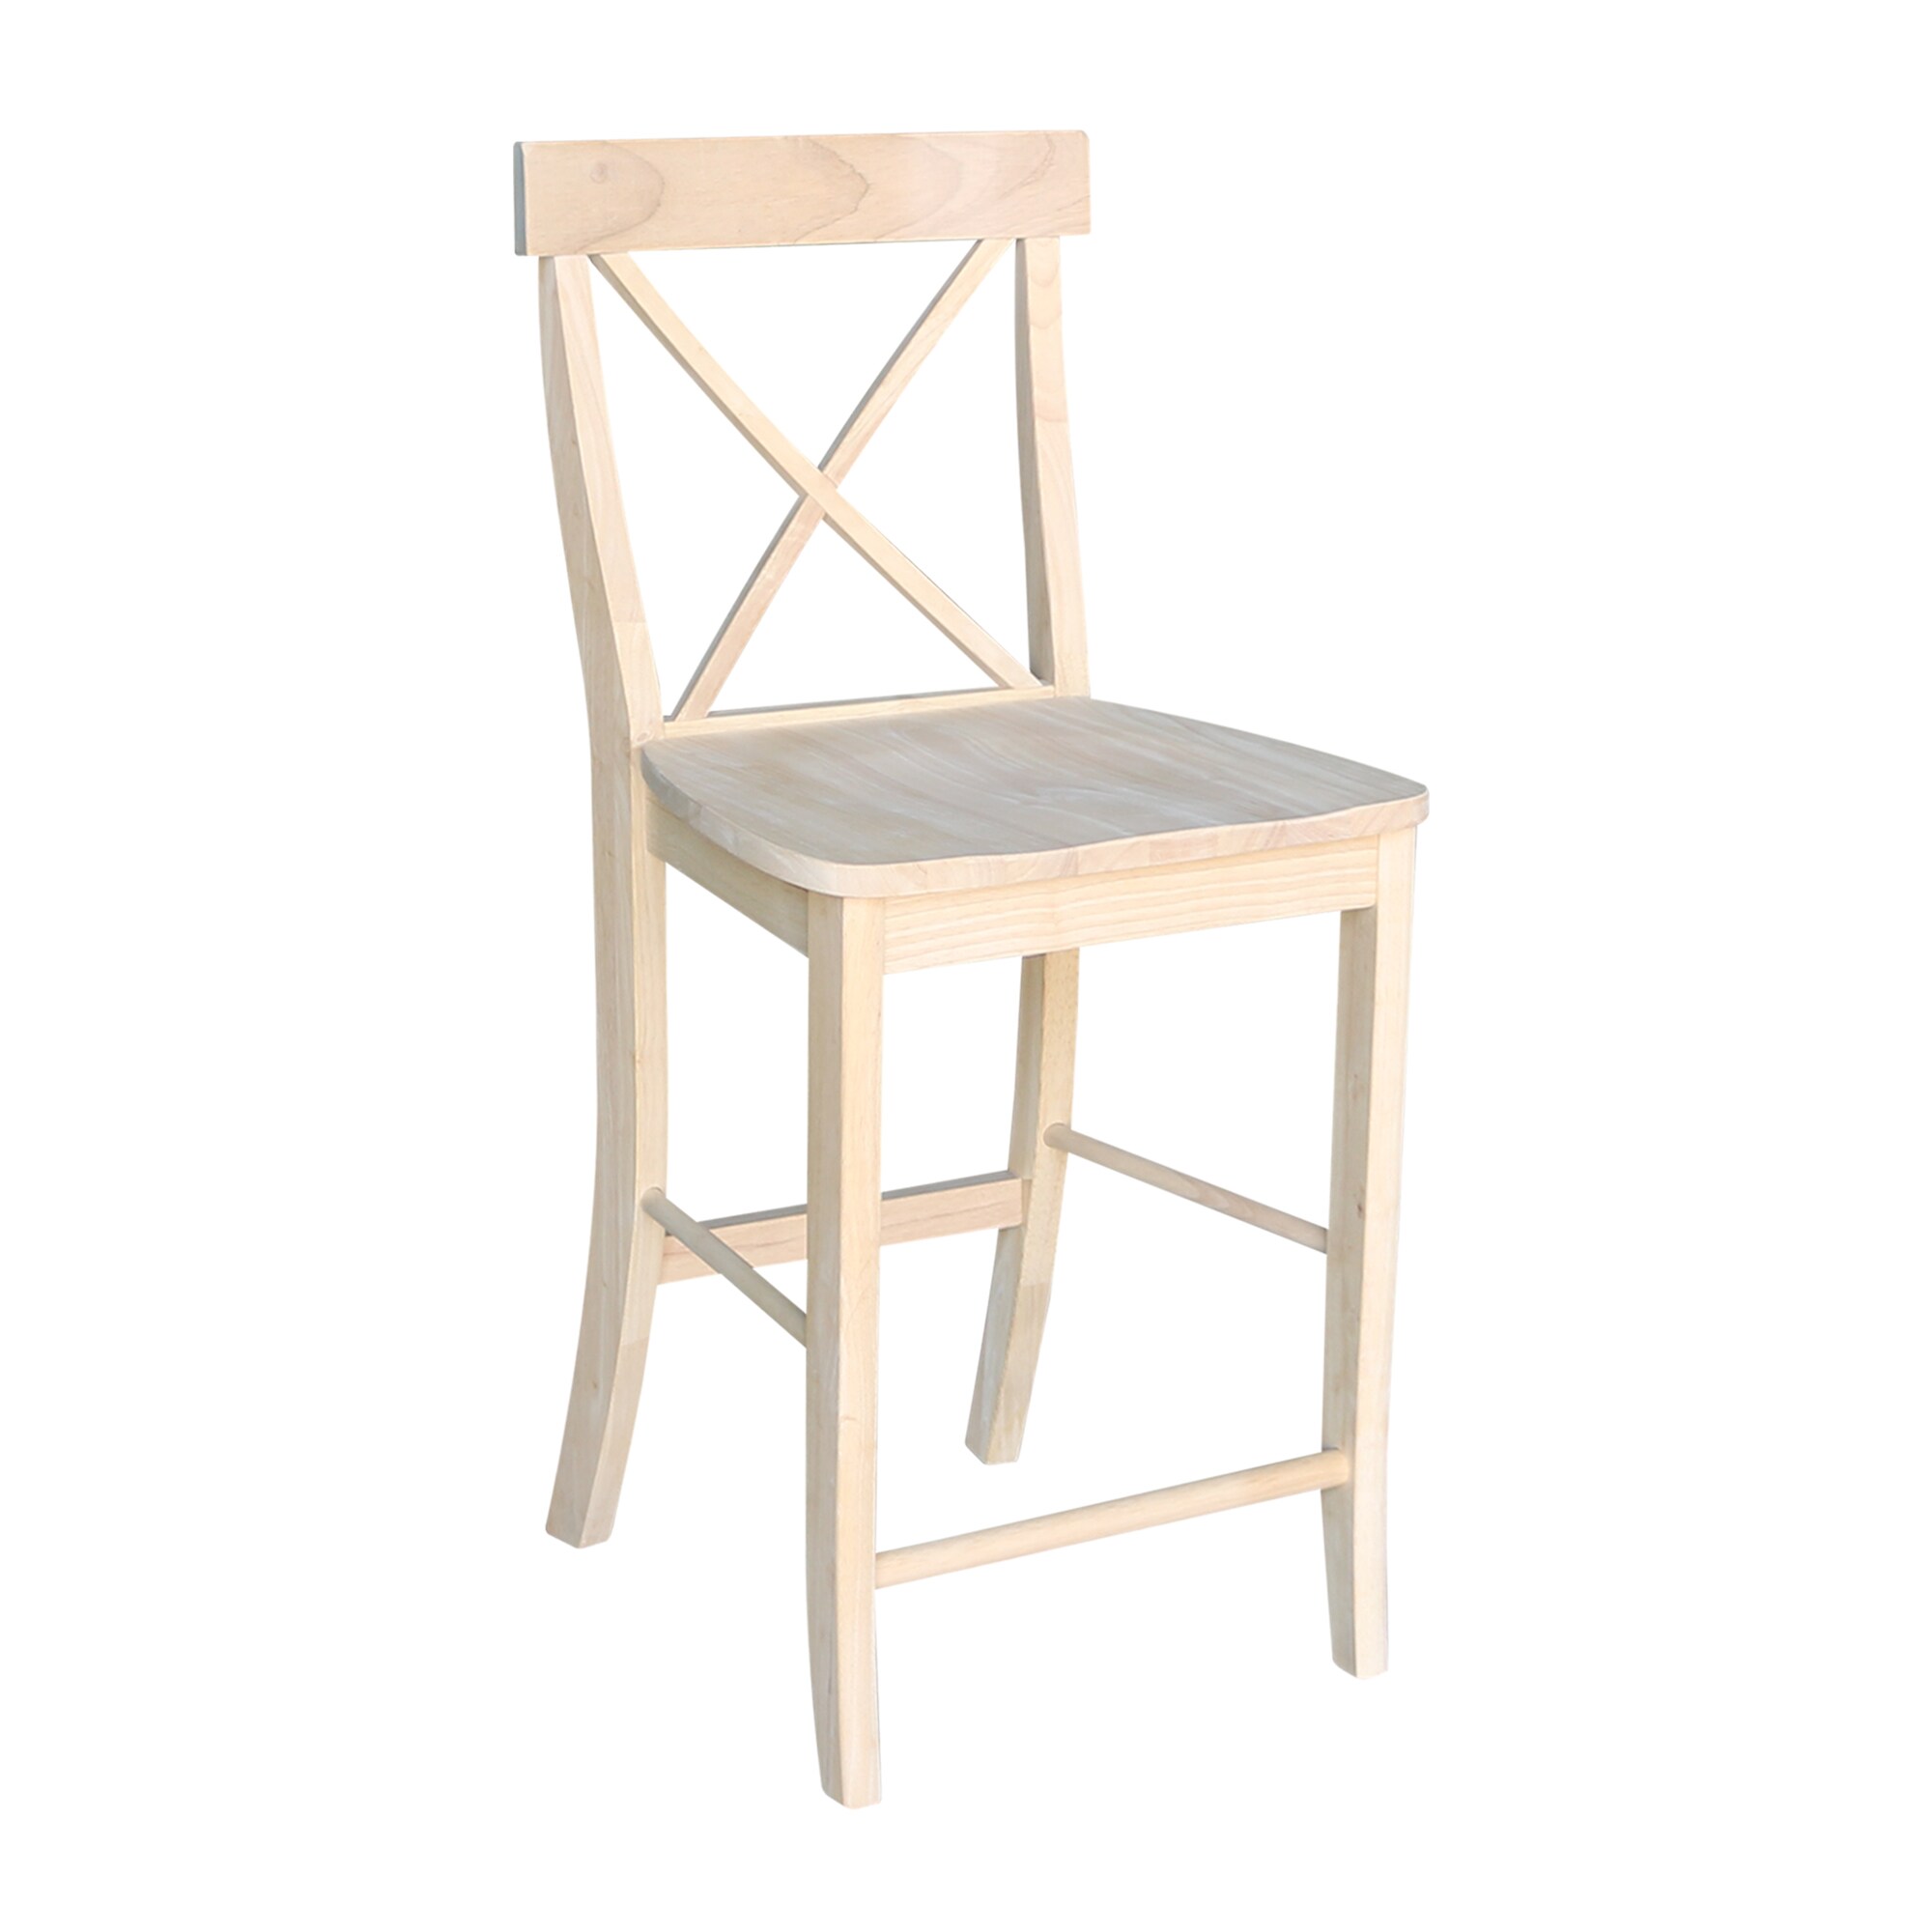 International Concepts S-202 24-inch Double X Stool Unfinished for sale online 